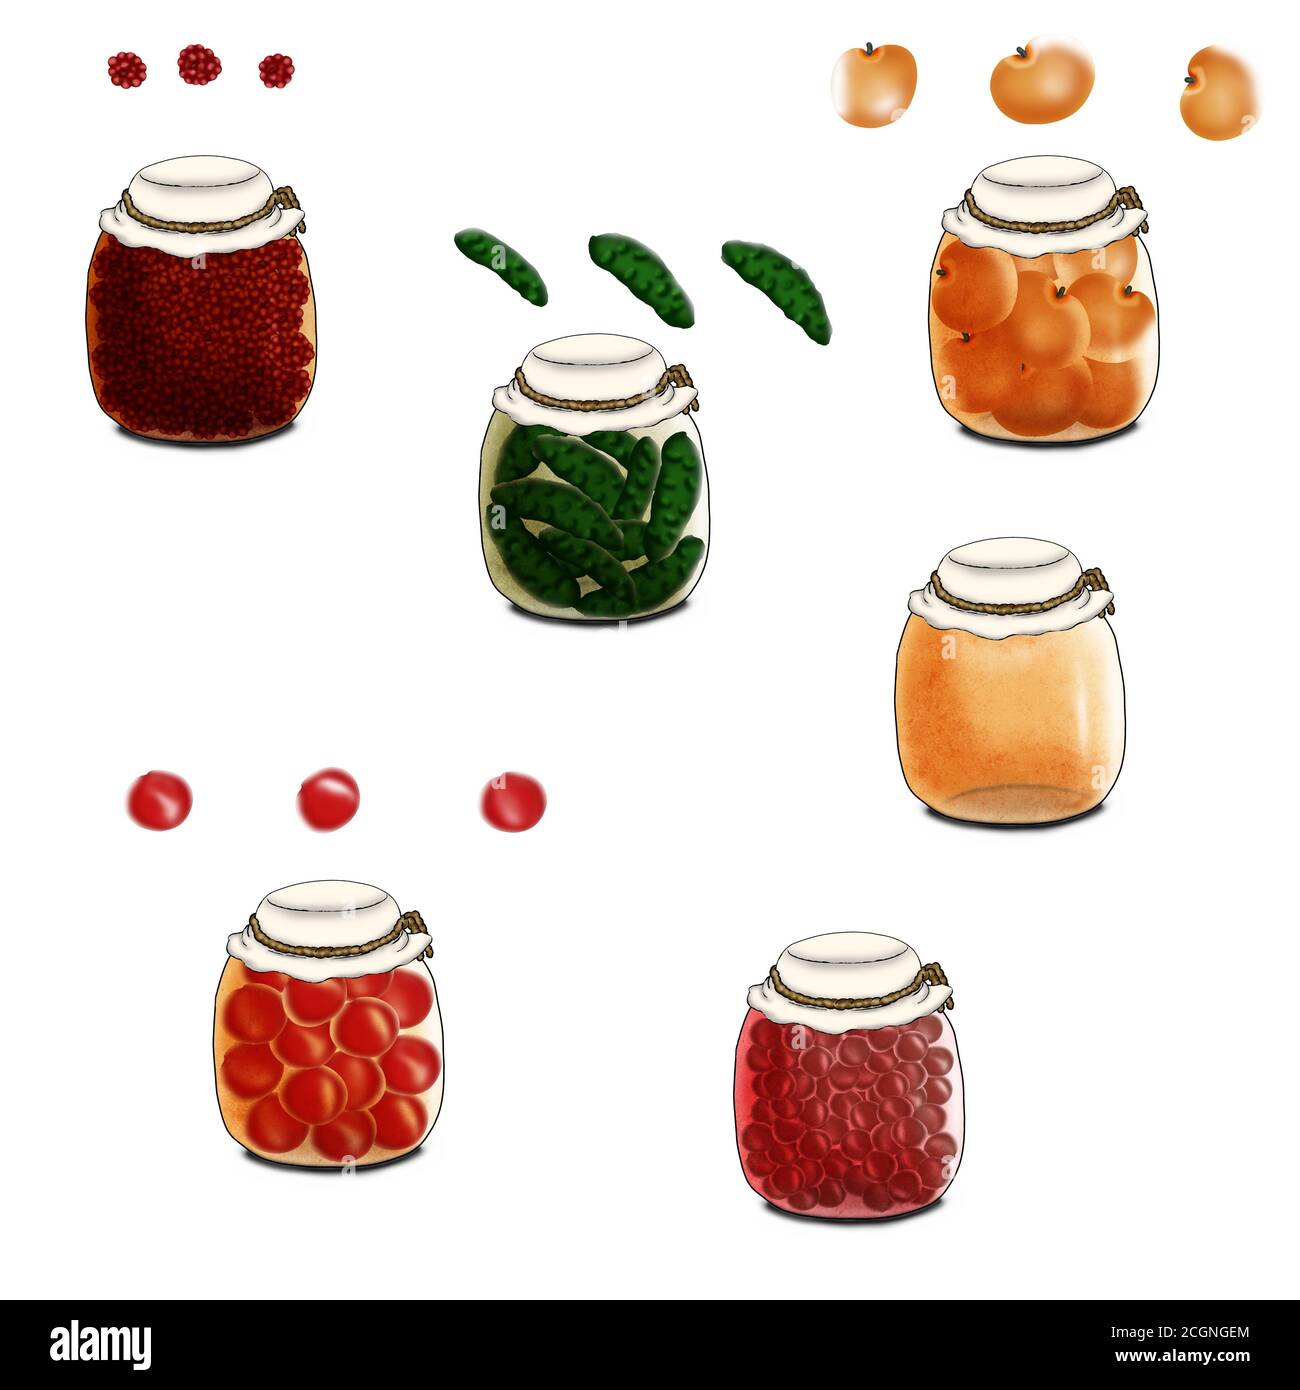 Jars with canned vegetables, berries and fruits.. Stock Photo